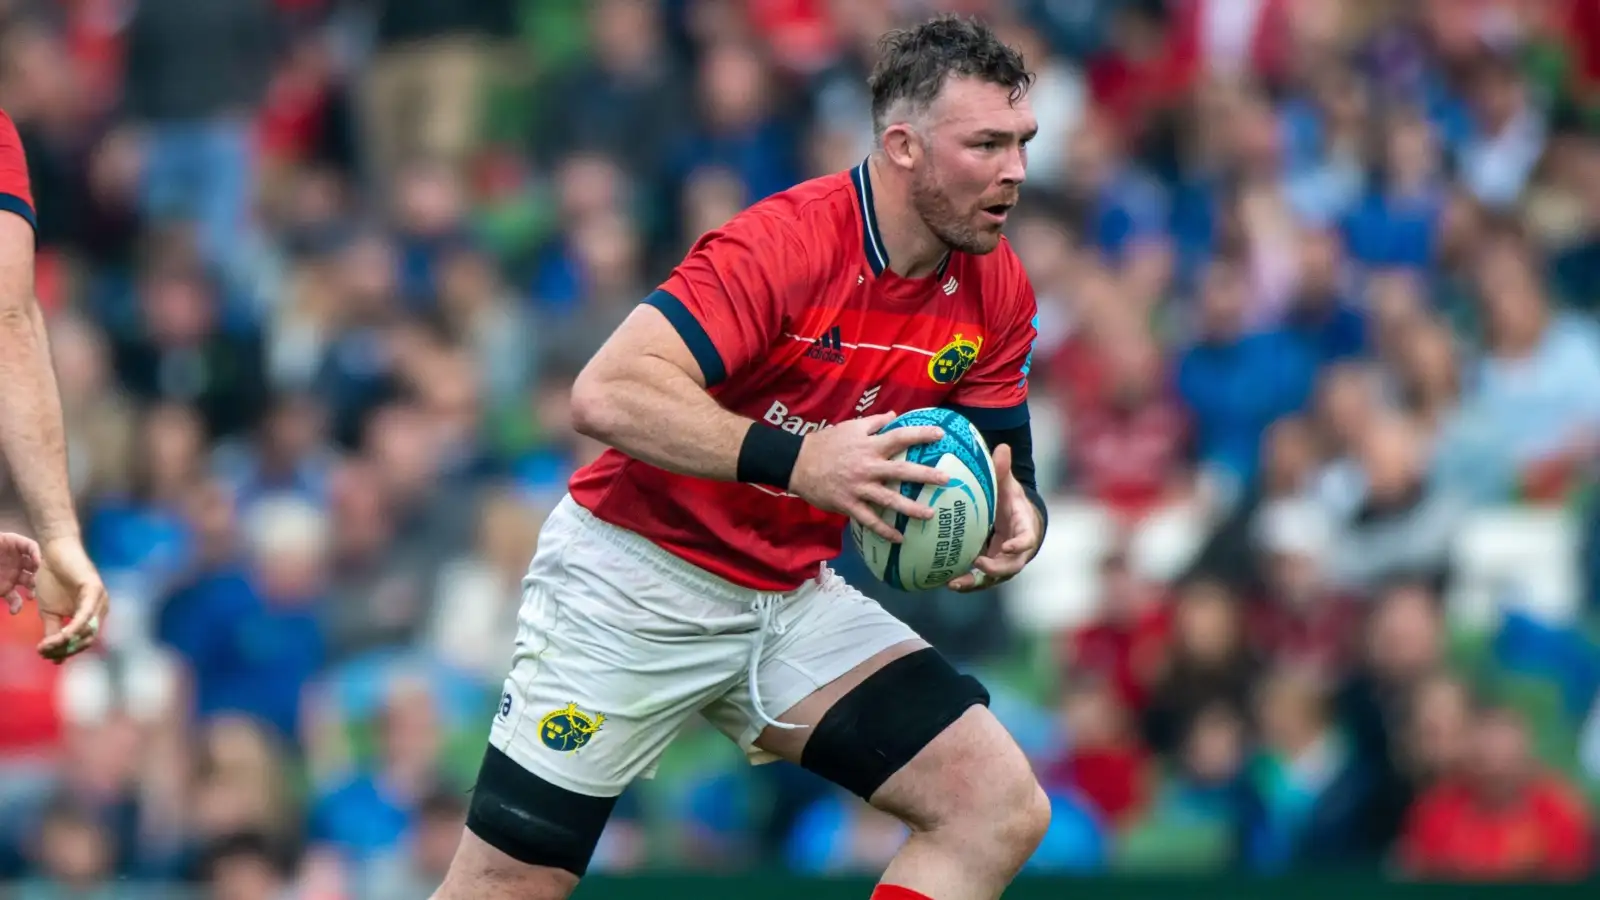 Munster captain Peter O'Mahony on the charge with ball in hand.